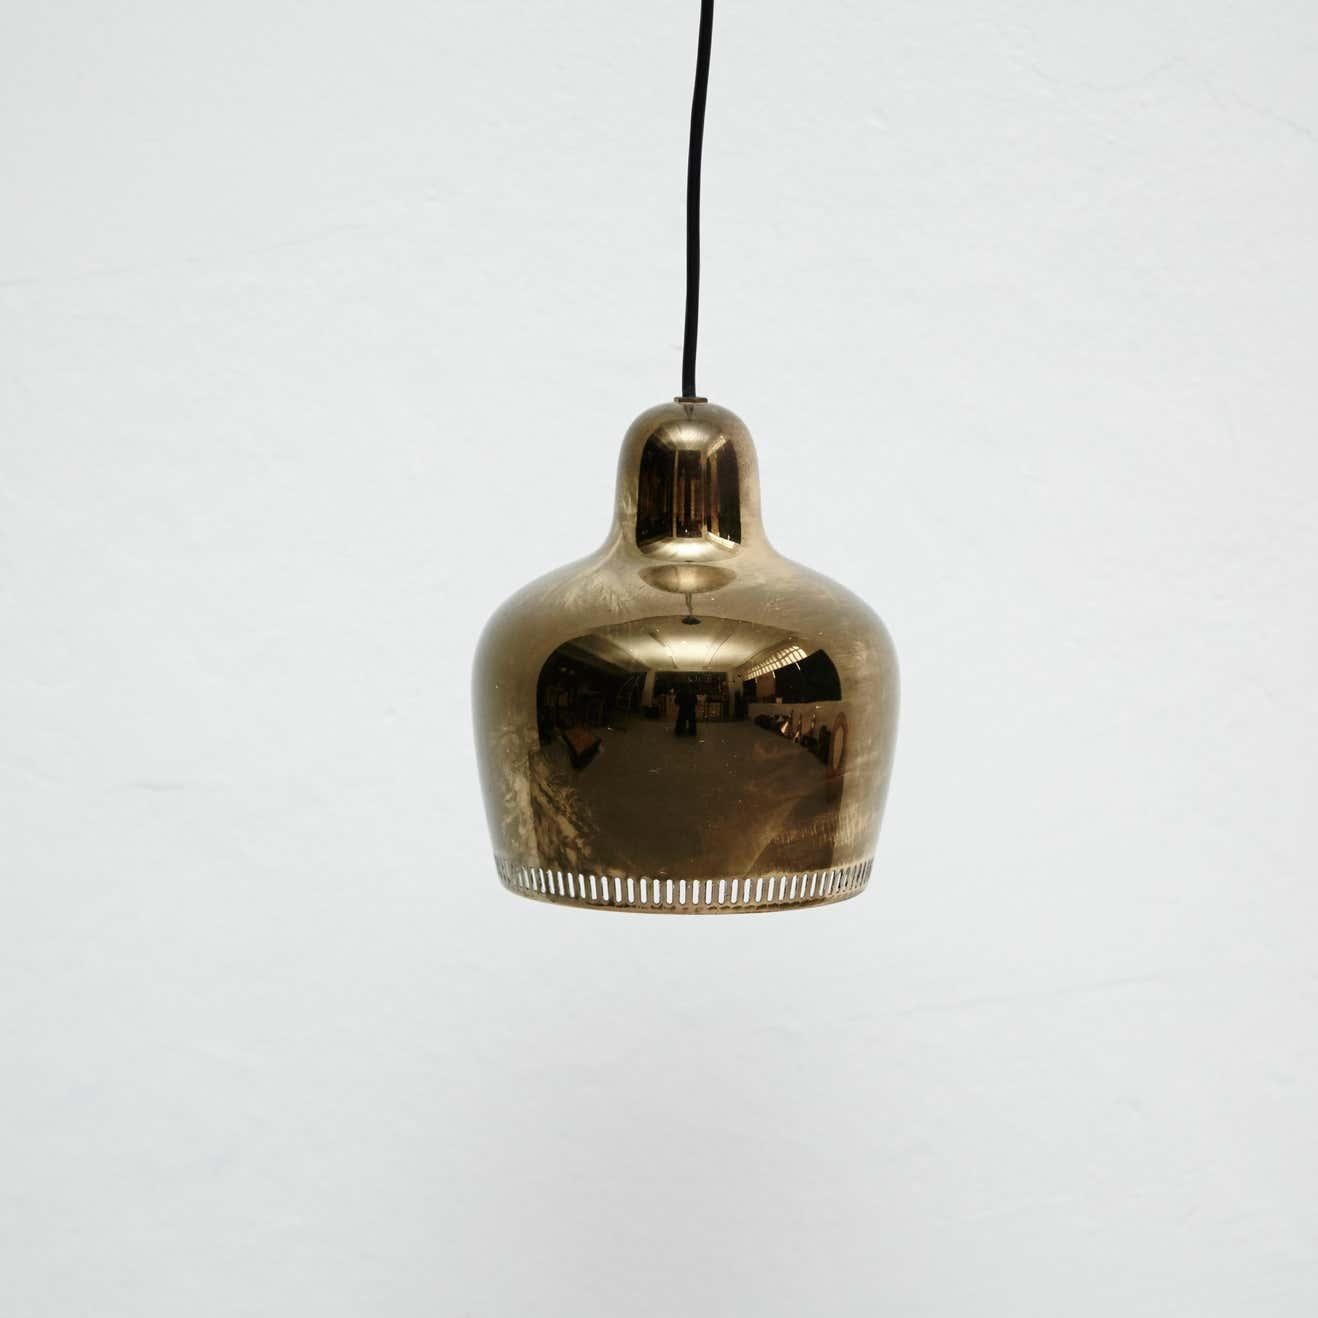 Pendant lamp designed by Alvar Aalto, circa 1935 for the Savoy restaurant in Helsinki.

In original condition, with minor wear consistent with age and use, preserving a beautiful patina to the brass.

Materials:
Brass

Dimensions:
ø 16.5 cm